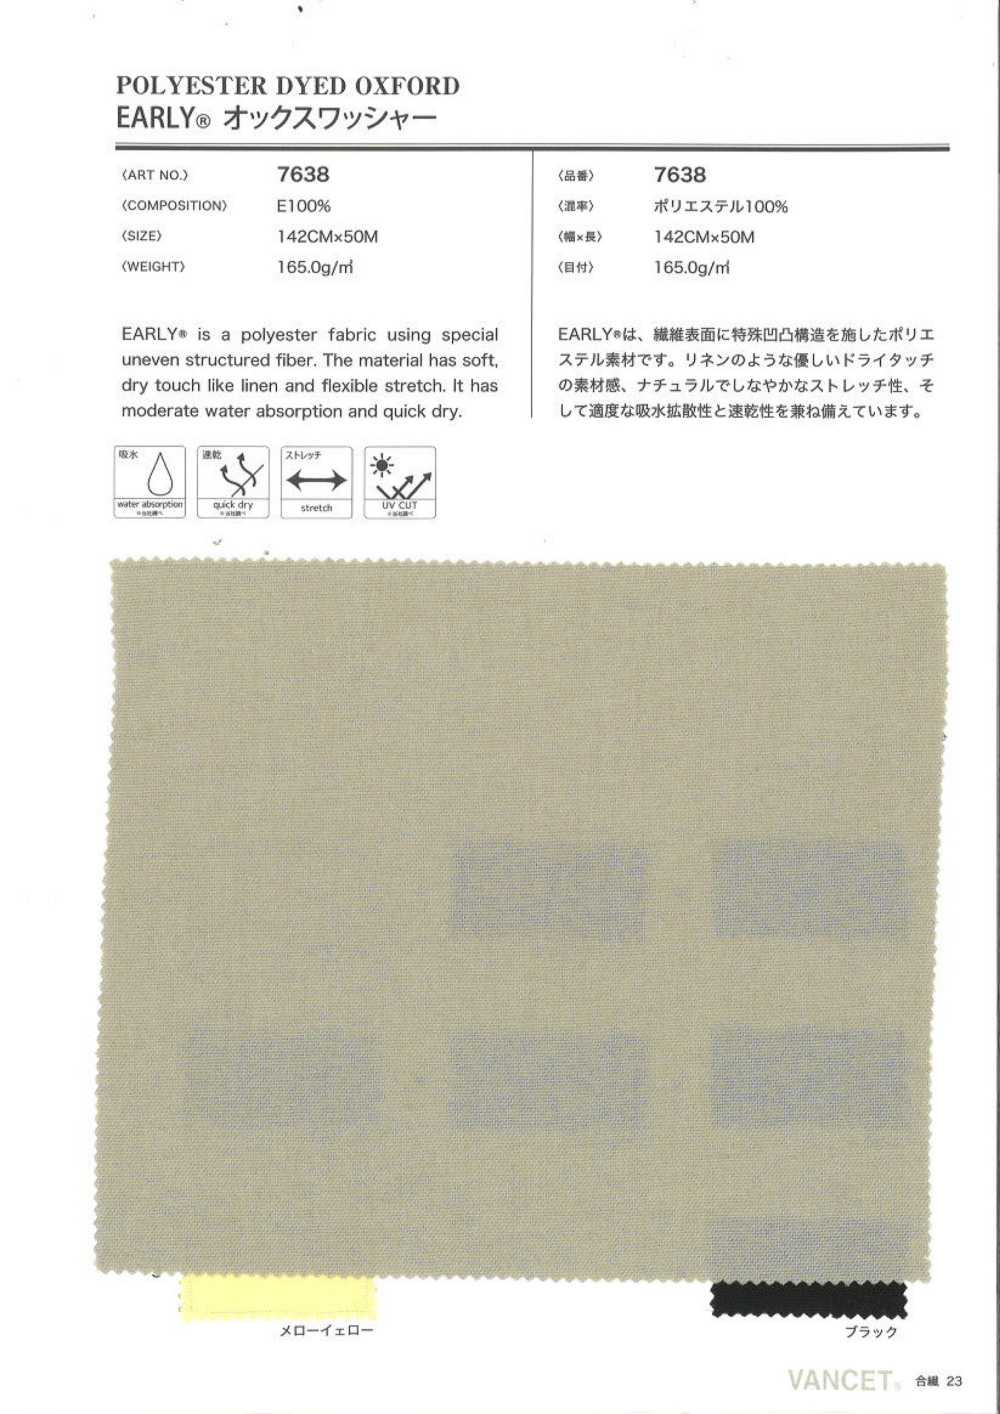 7638 Procesamiento EARLY® Oxford[Fabrica Textil] VANCET